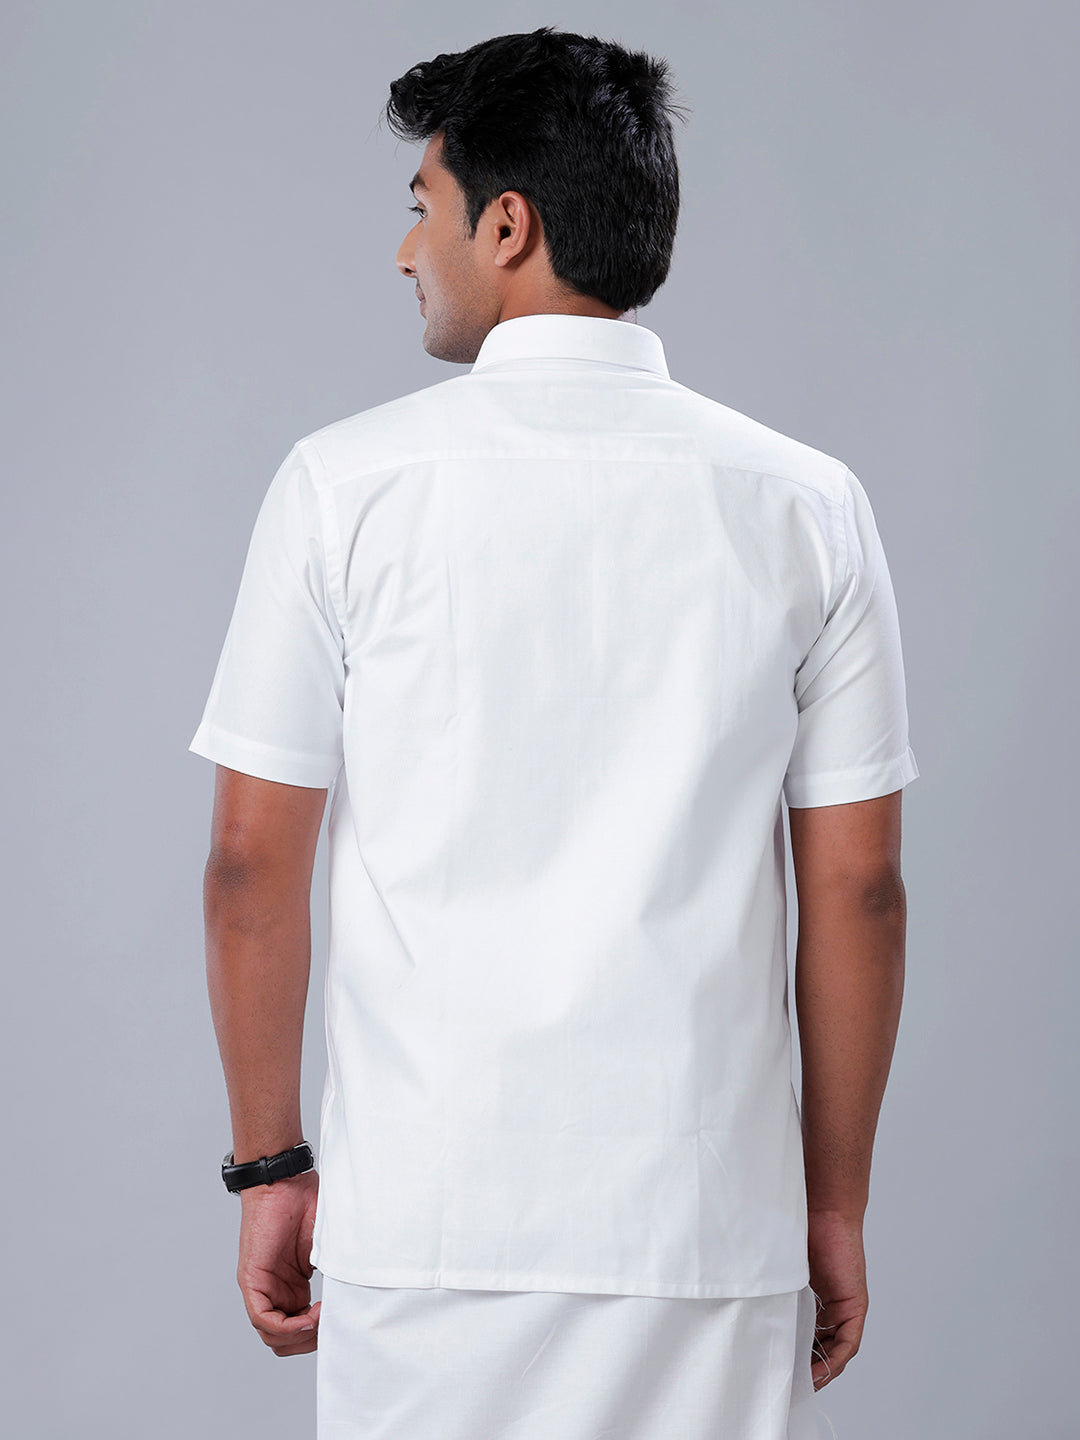 Mens Premium Pure Cotton White Shirt Half Sleeves Limited Edition 1-Back view